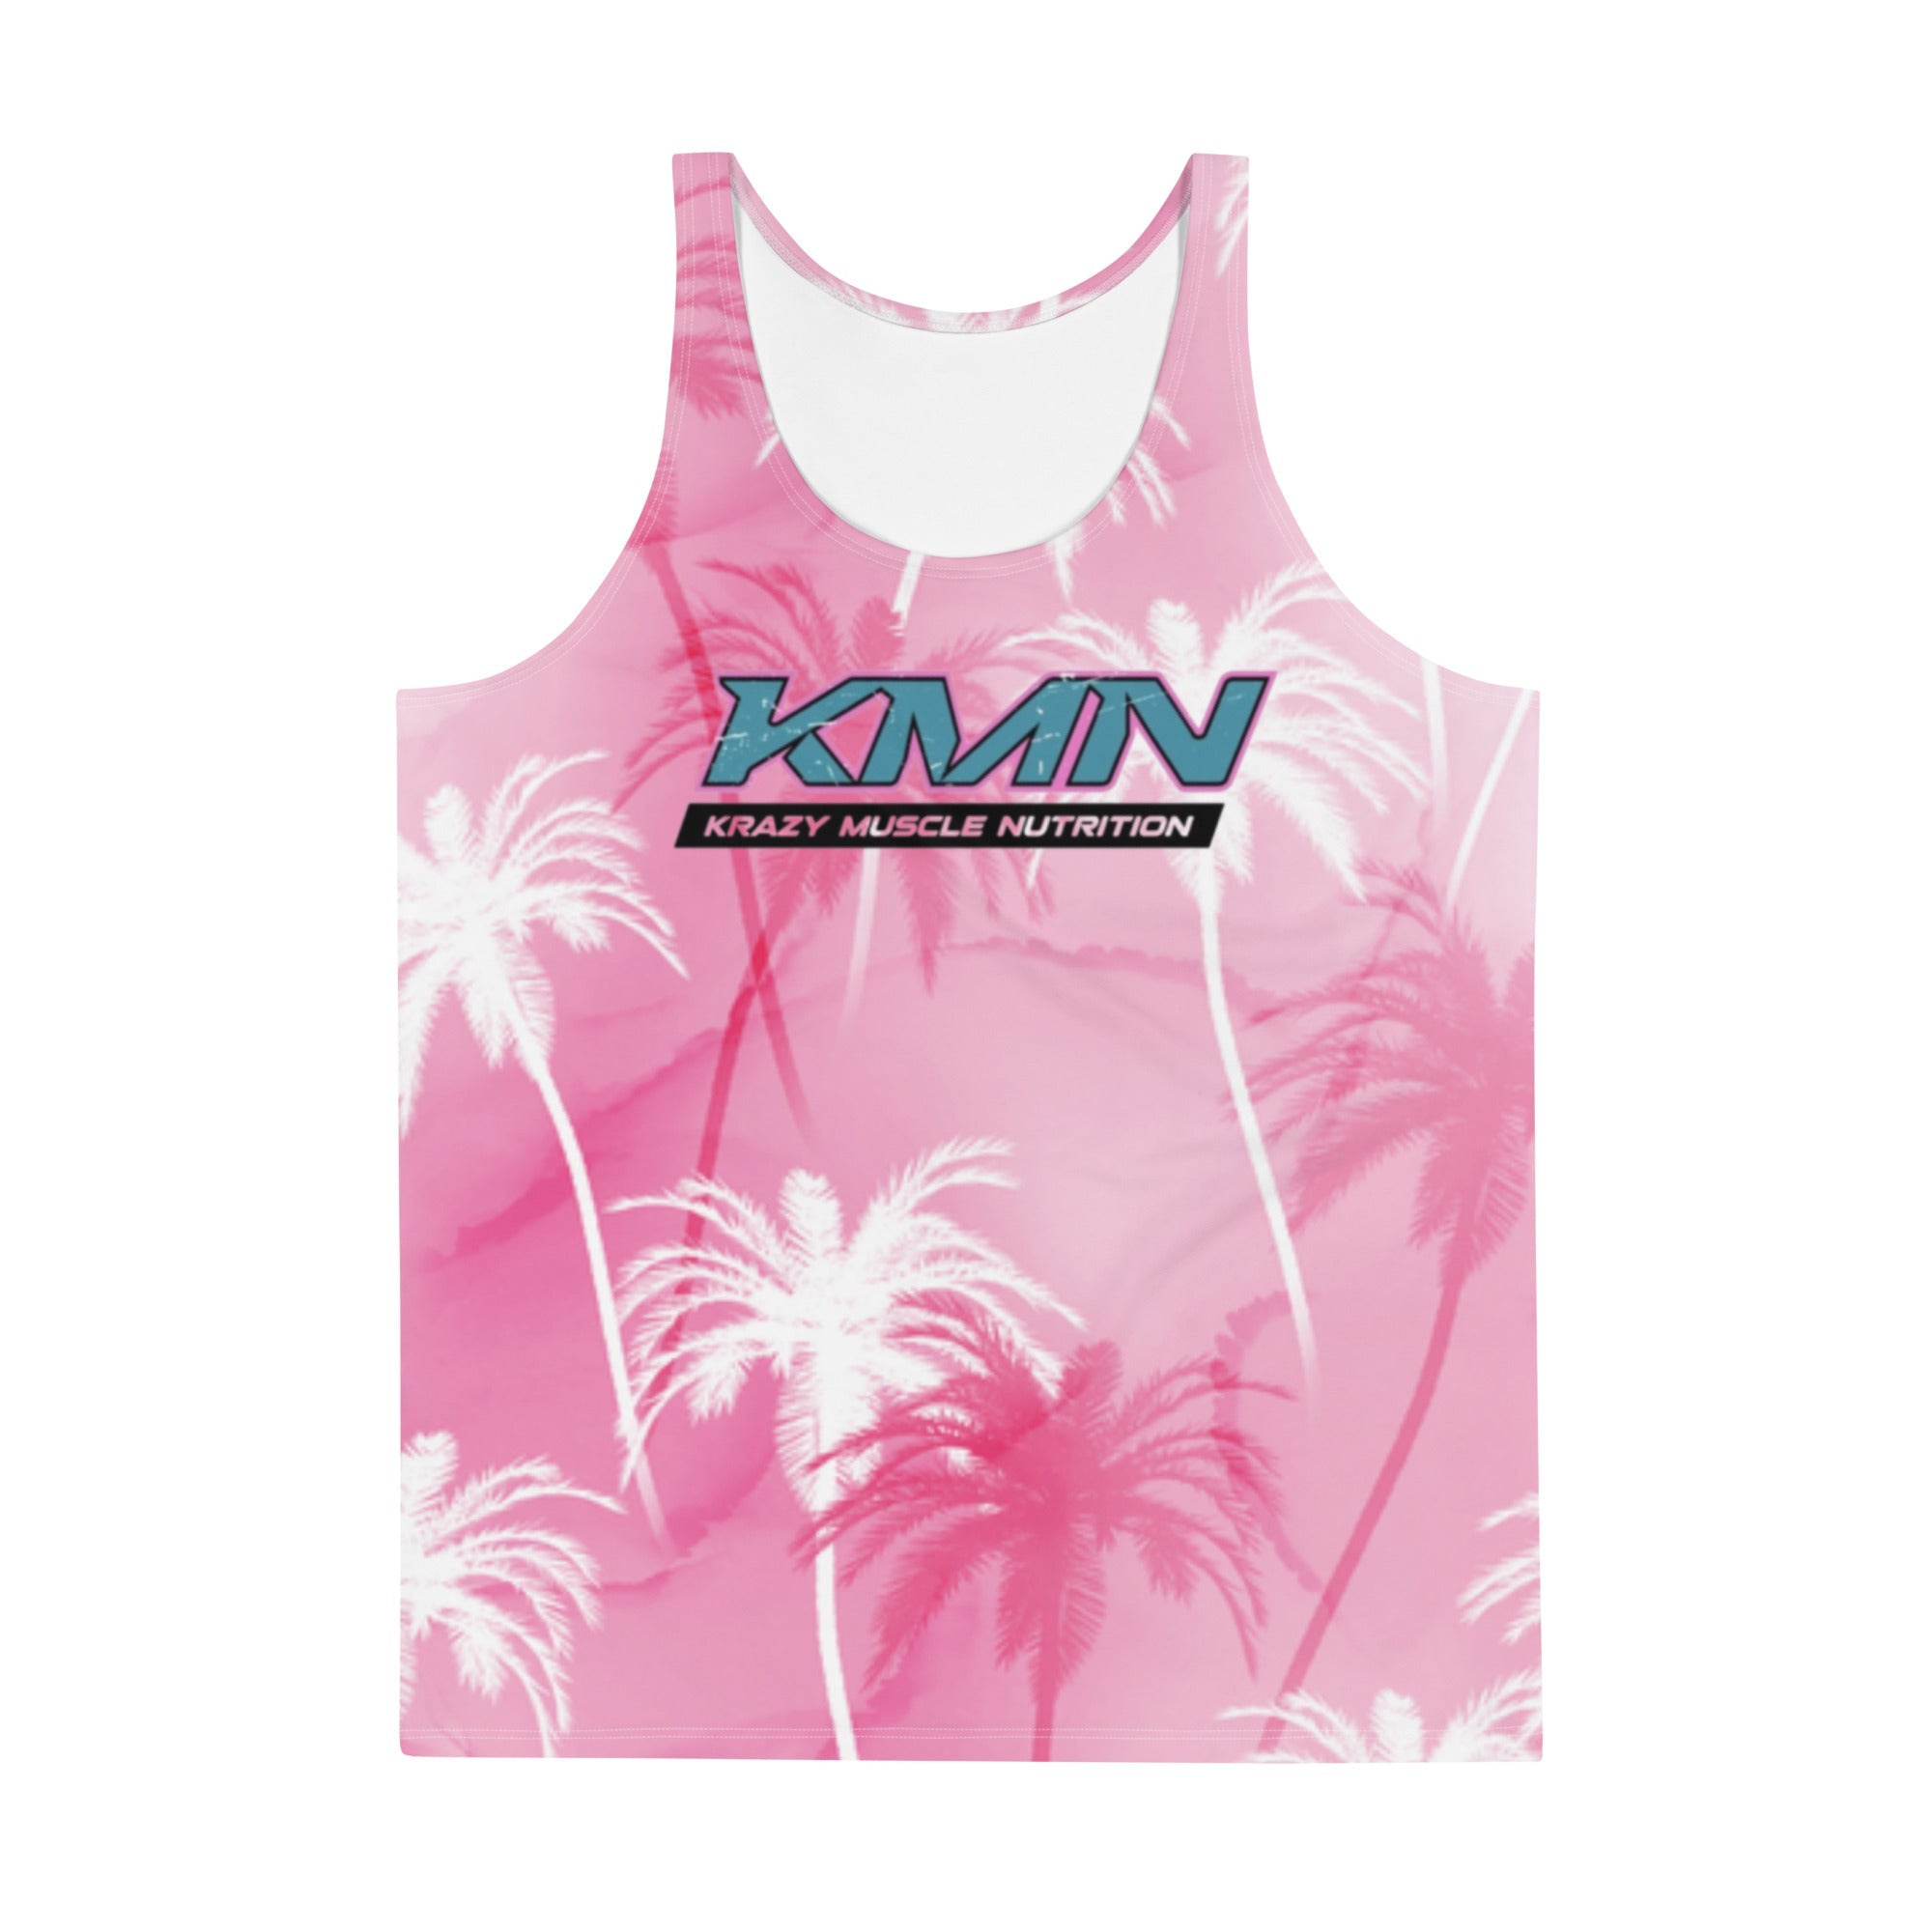 Pink Vibes Tank - Krazy Muscle Nutrition Krazy Muscle Nutrition8773988_9049